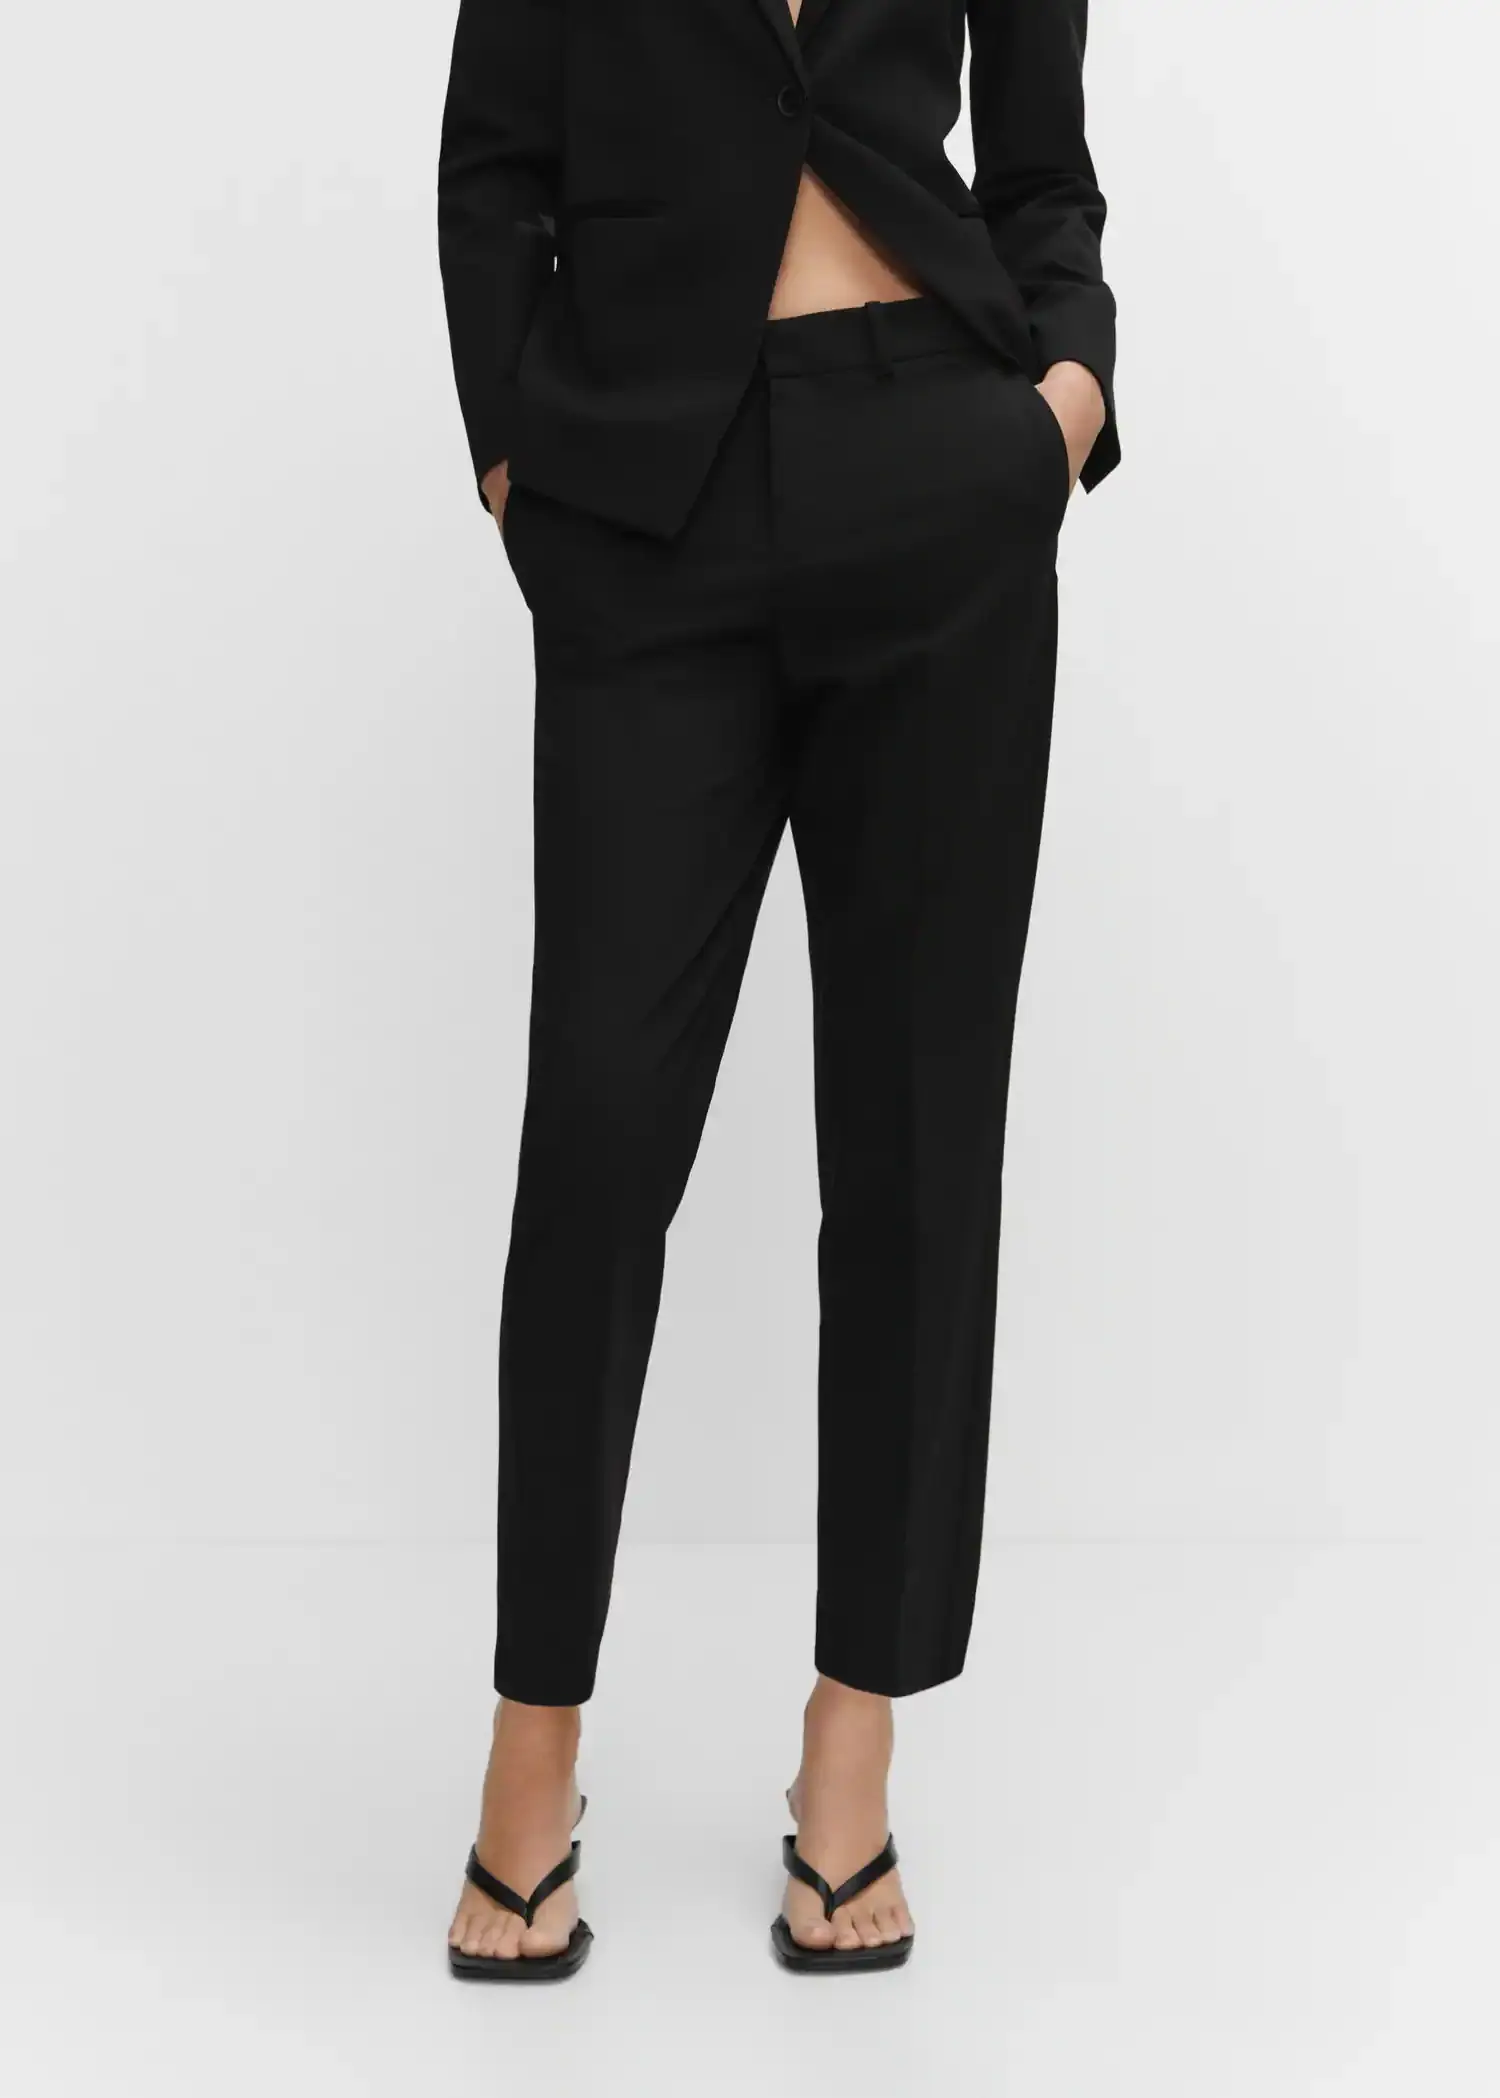 Mango Straight suit trousers. a person wearing black pants and a black shirt. 